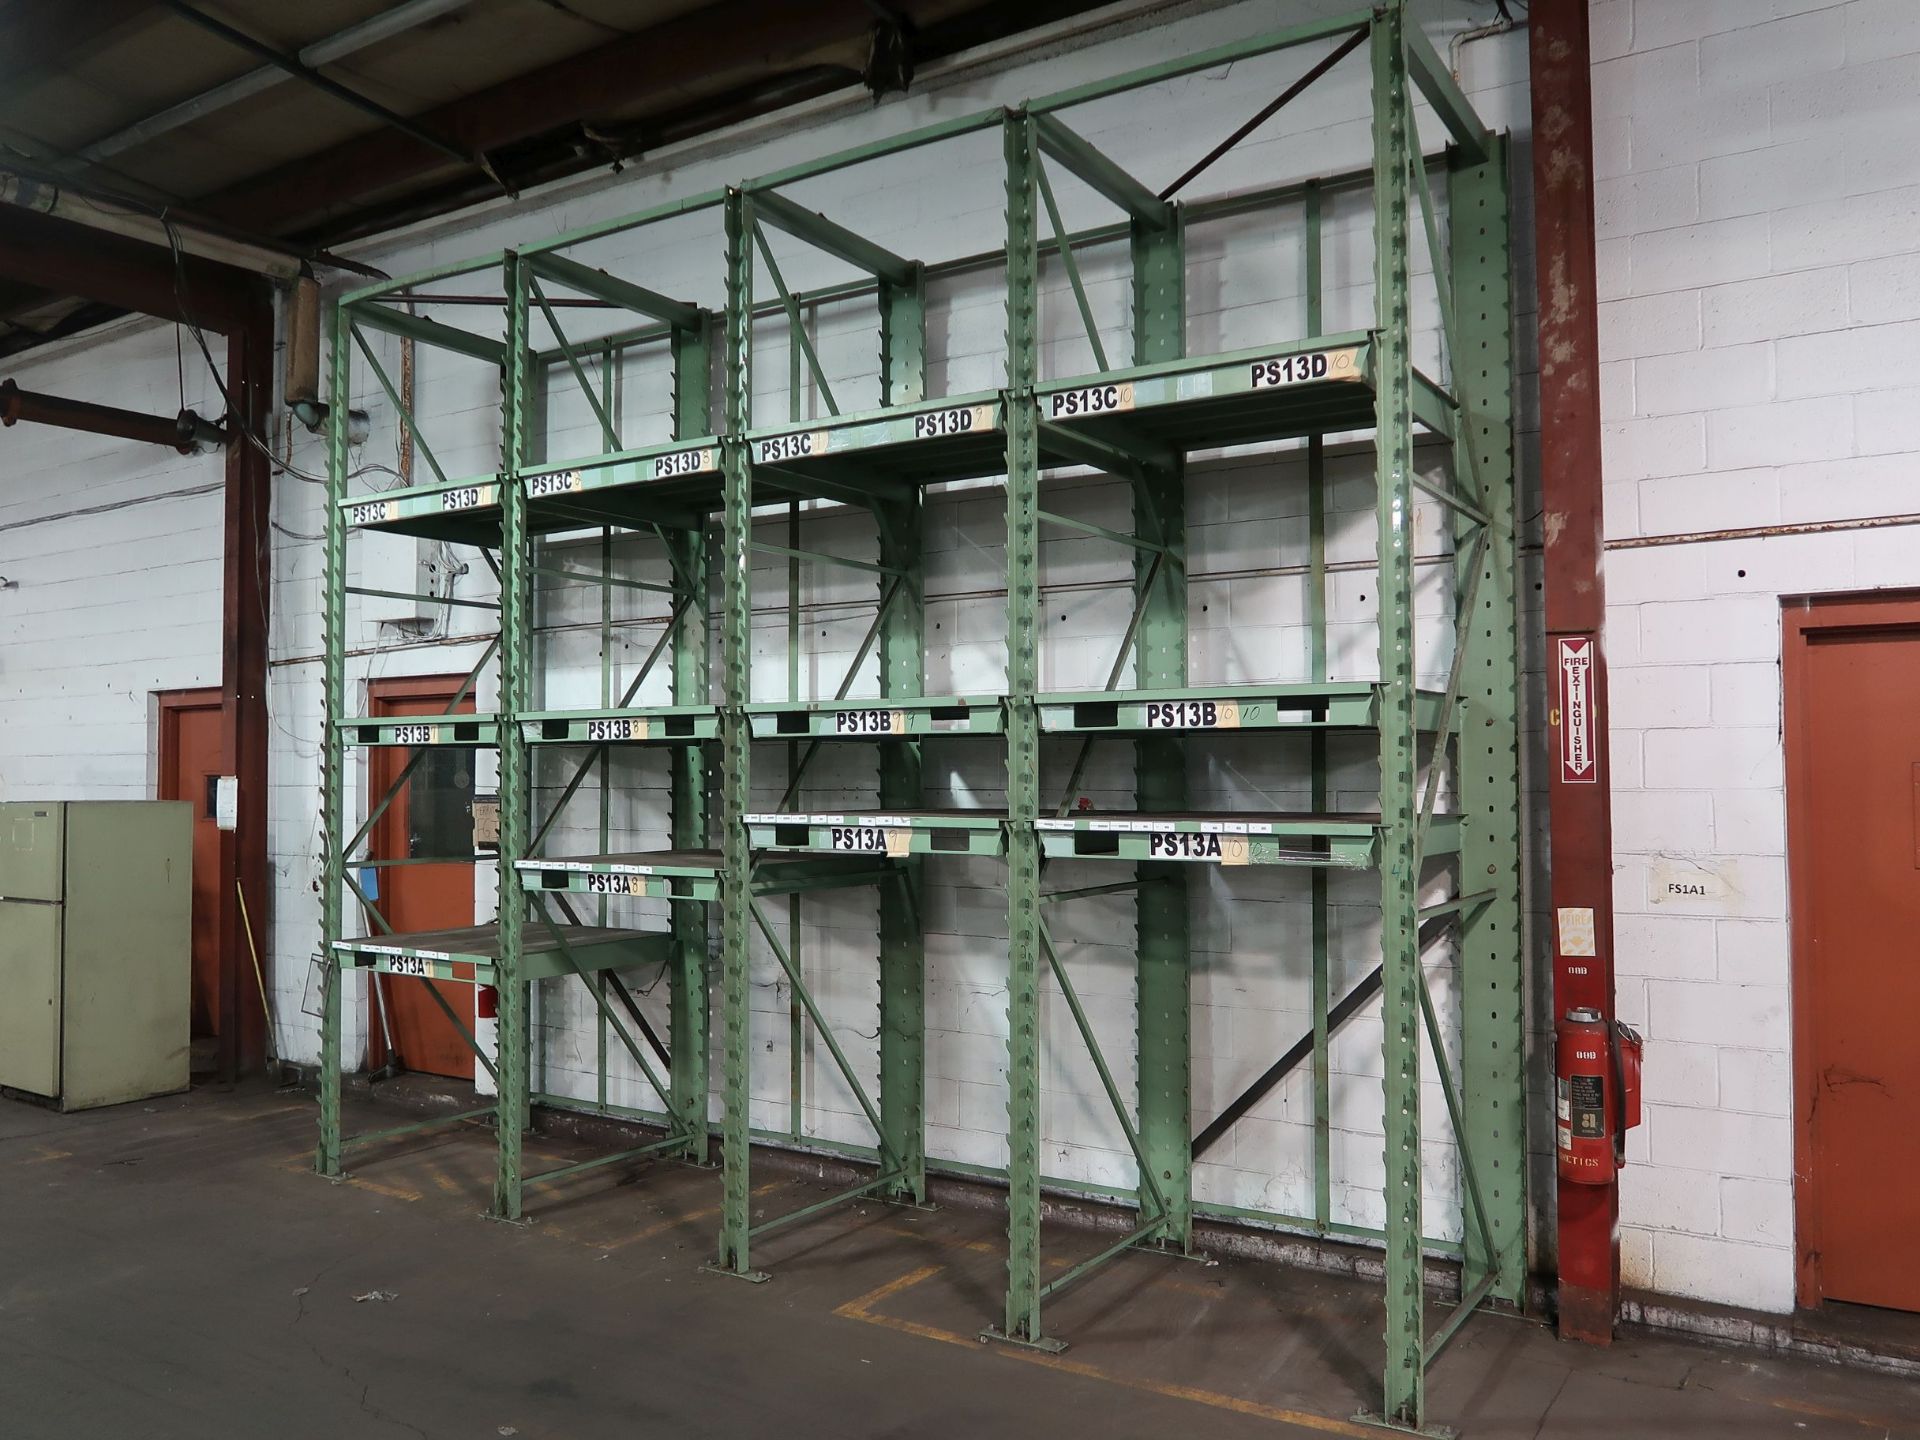 (LOT) (4) SECTIONS 43" X 43" X 154" STANLEY VIDMAR "STAK SYSTEM" RACKS WITH (12) 43" X 43" PALLETS - Image 2 of 2